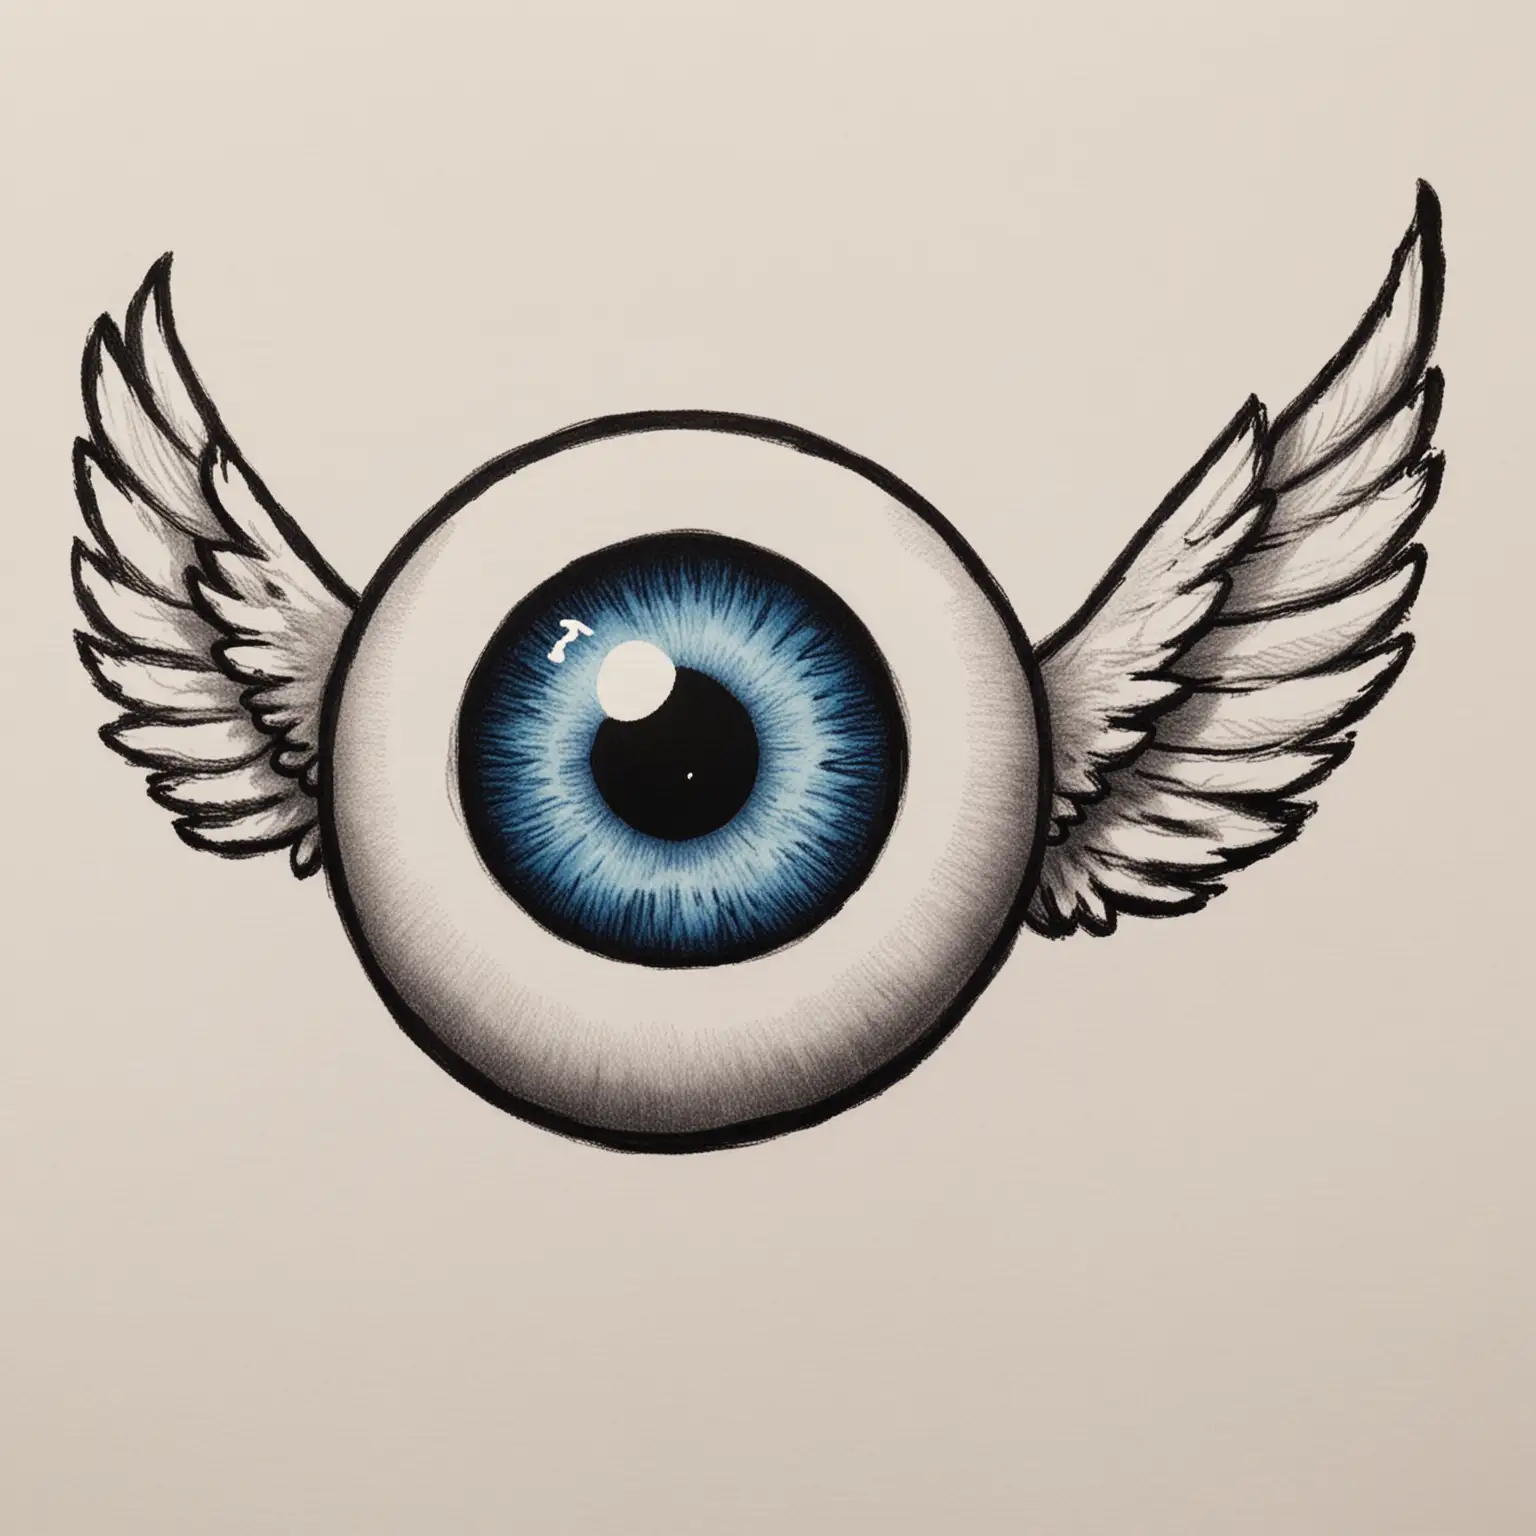 a very simple marker drawing of an eyeball with wings
